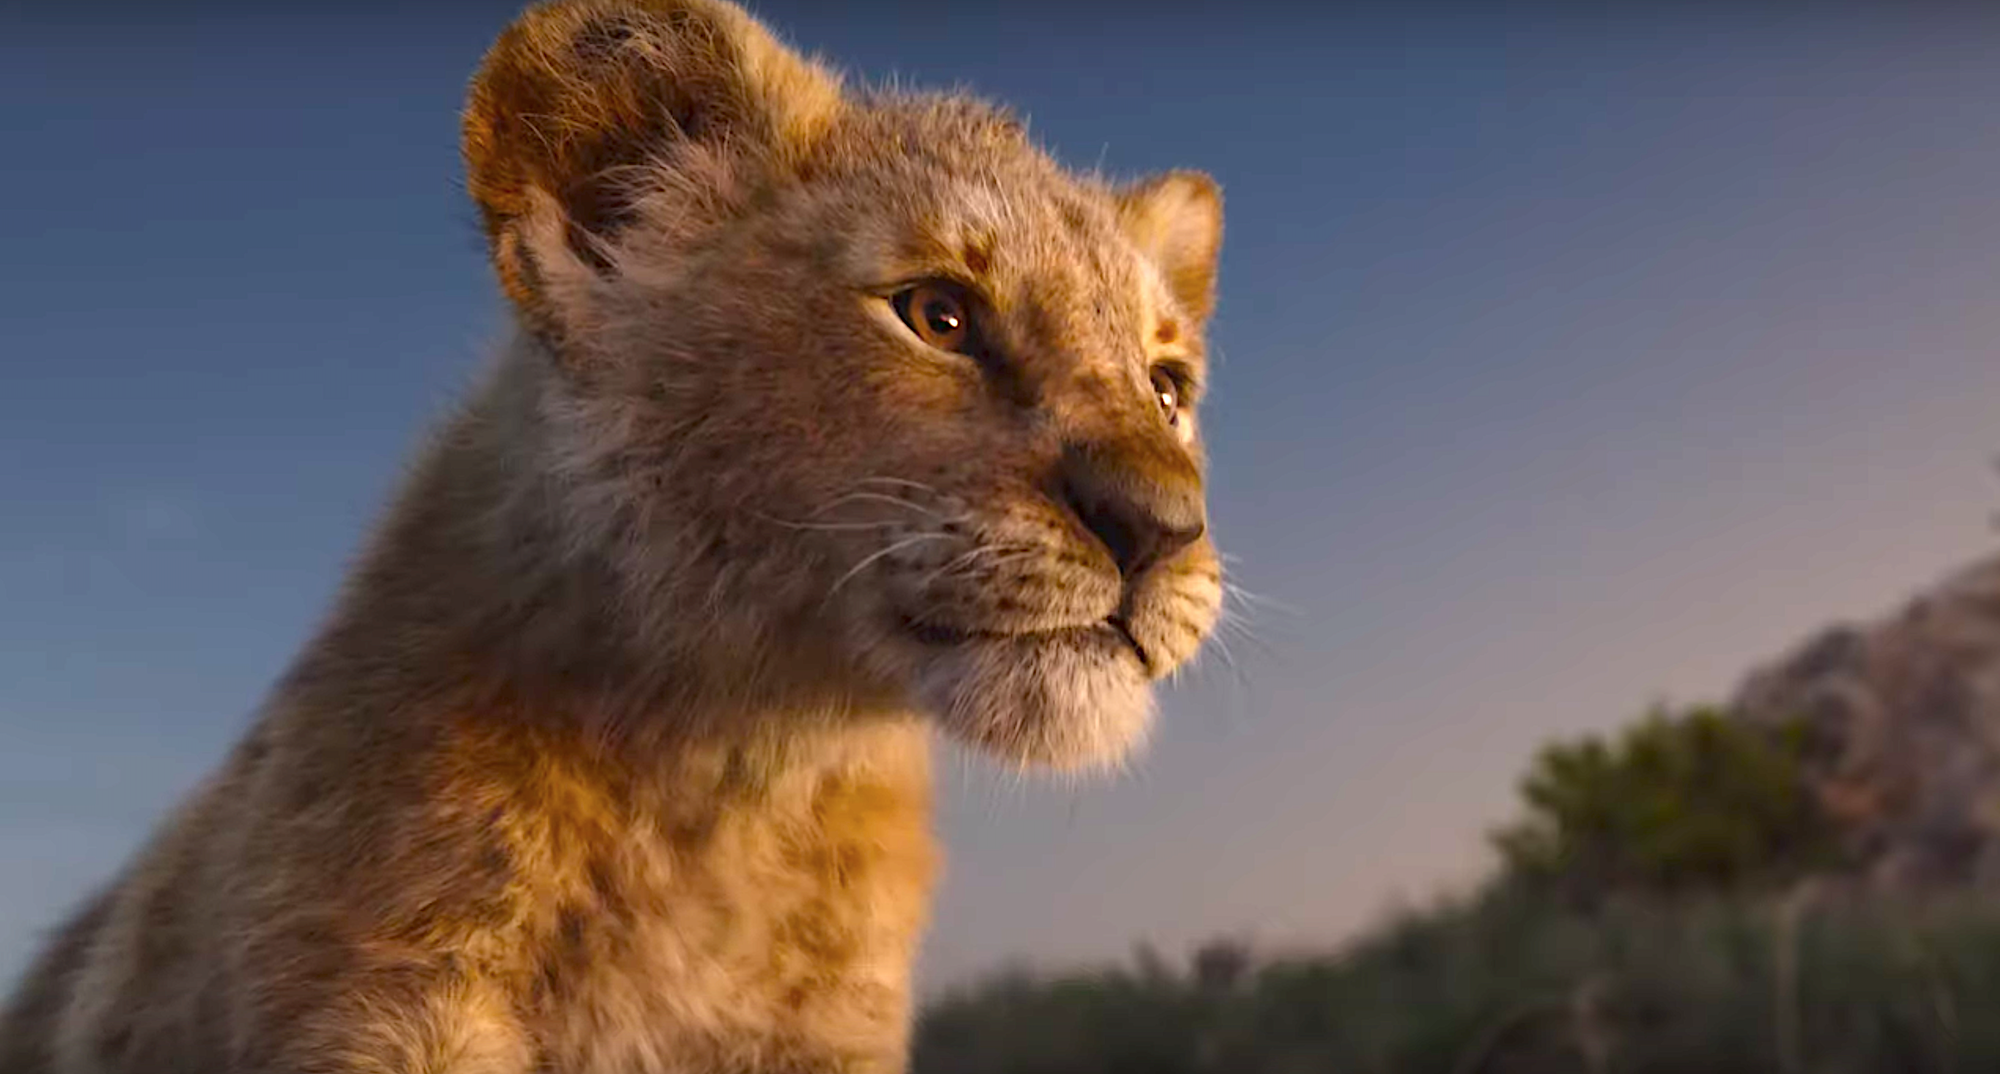 How The Lion King And Other Disney Movies Portray Class Negatively